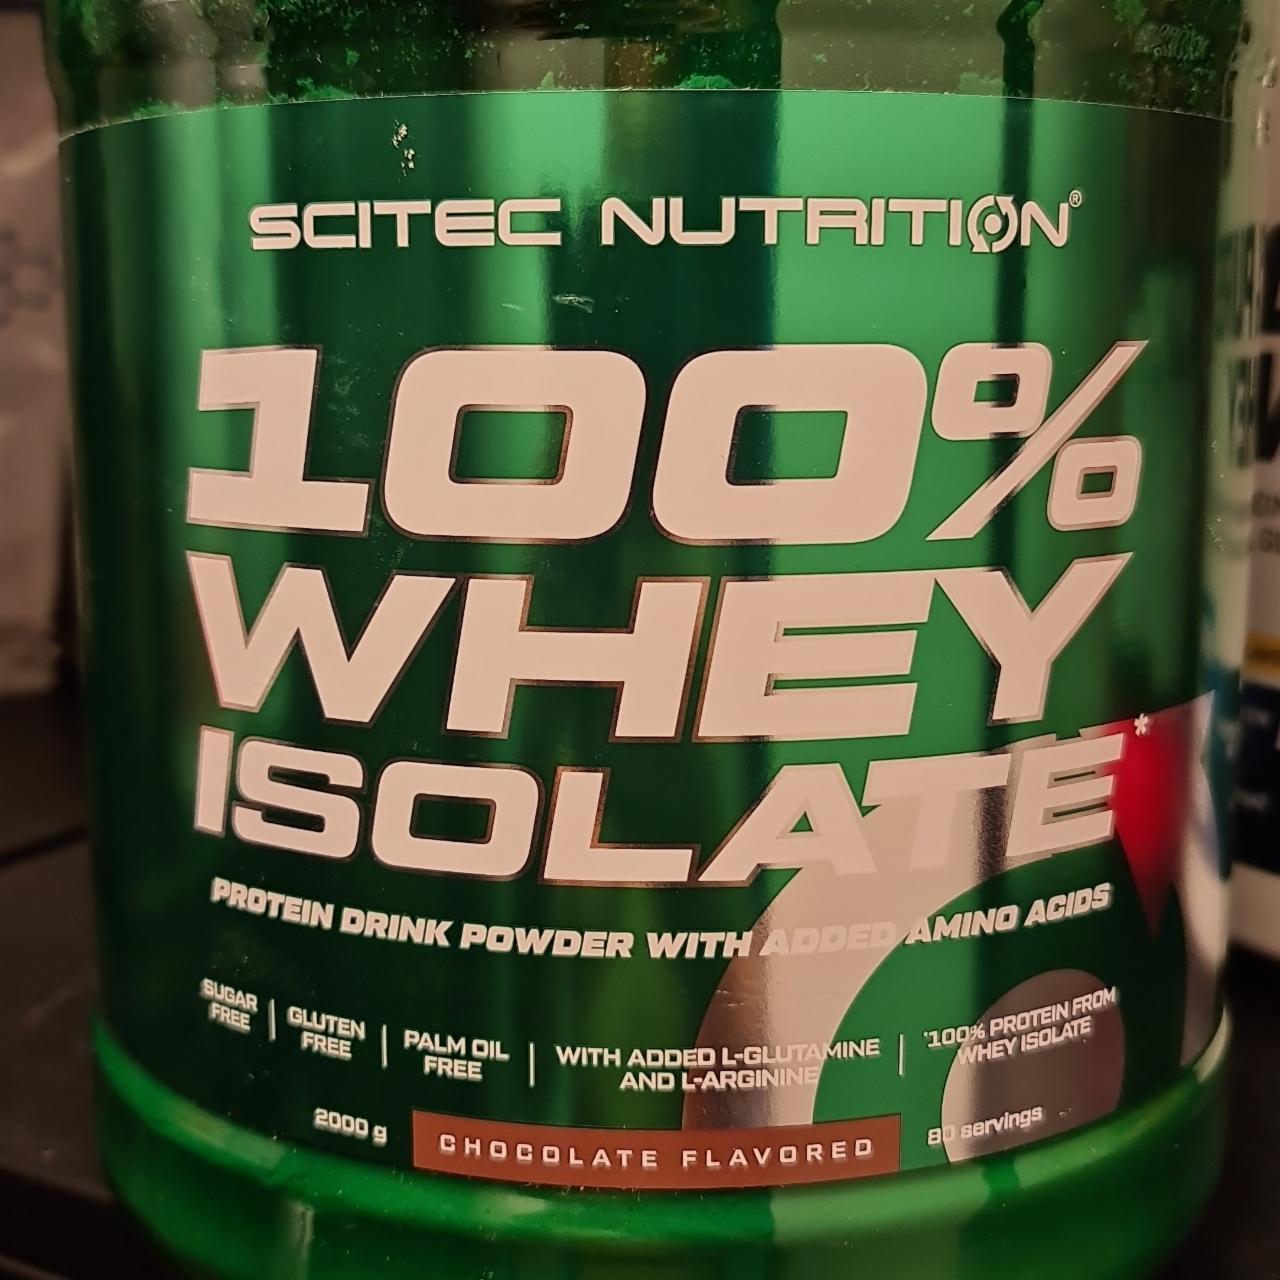 Fotografie - 100% Whey Isolate Protein Drink Powder Chocolate flavored Scitec Nutrition